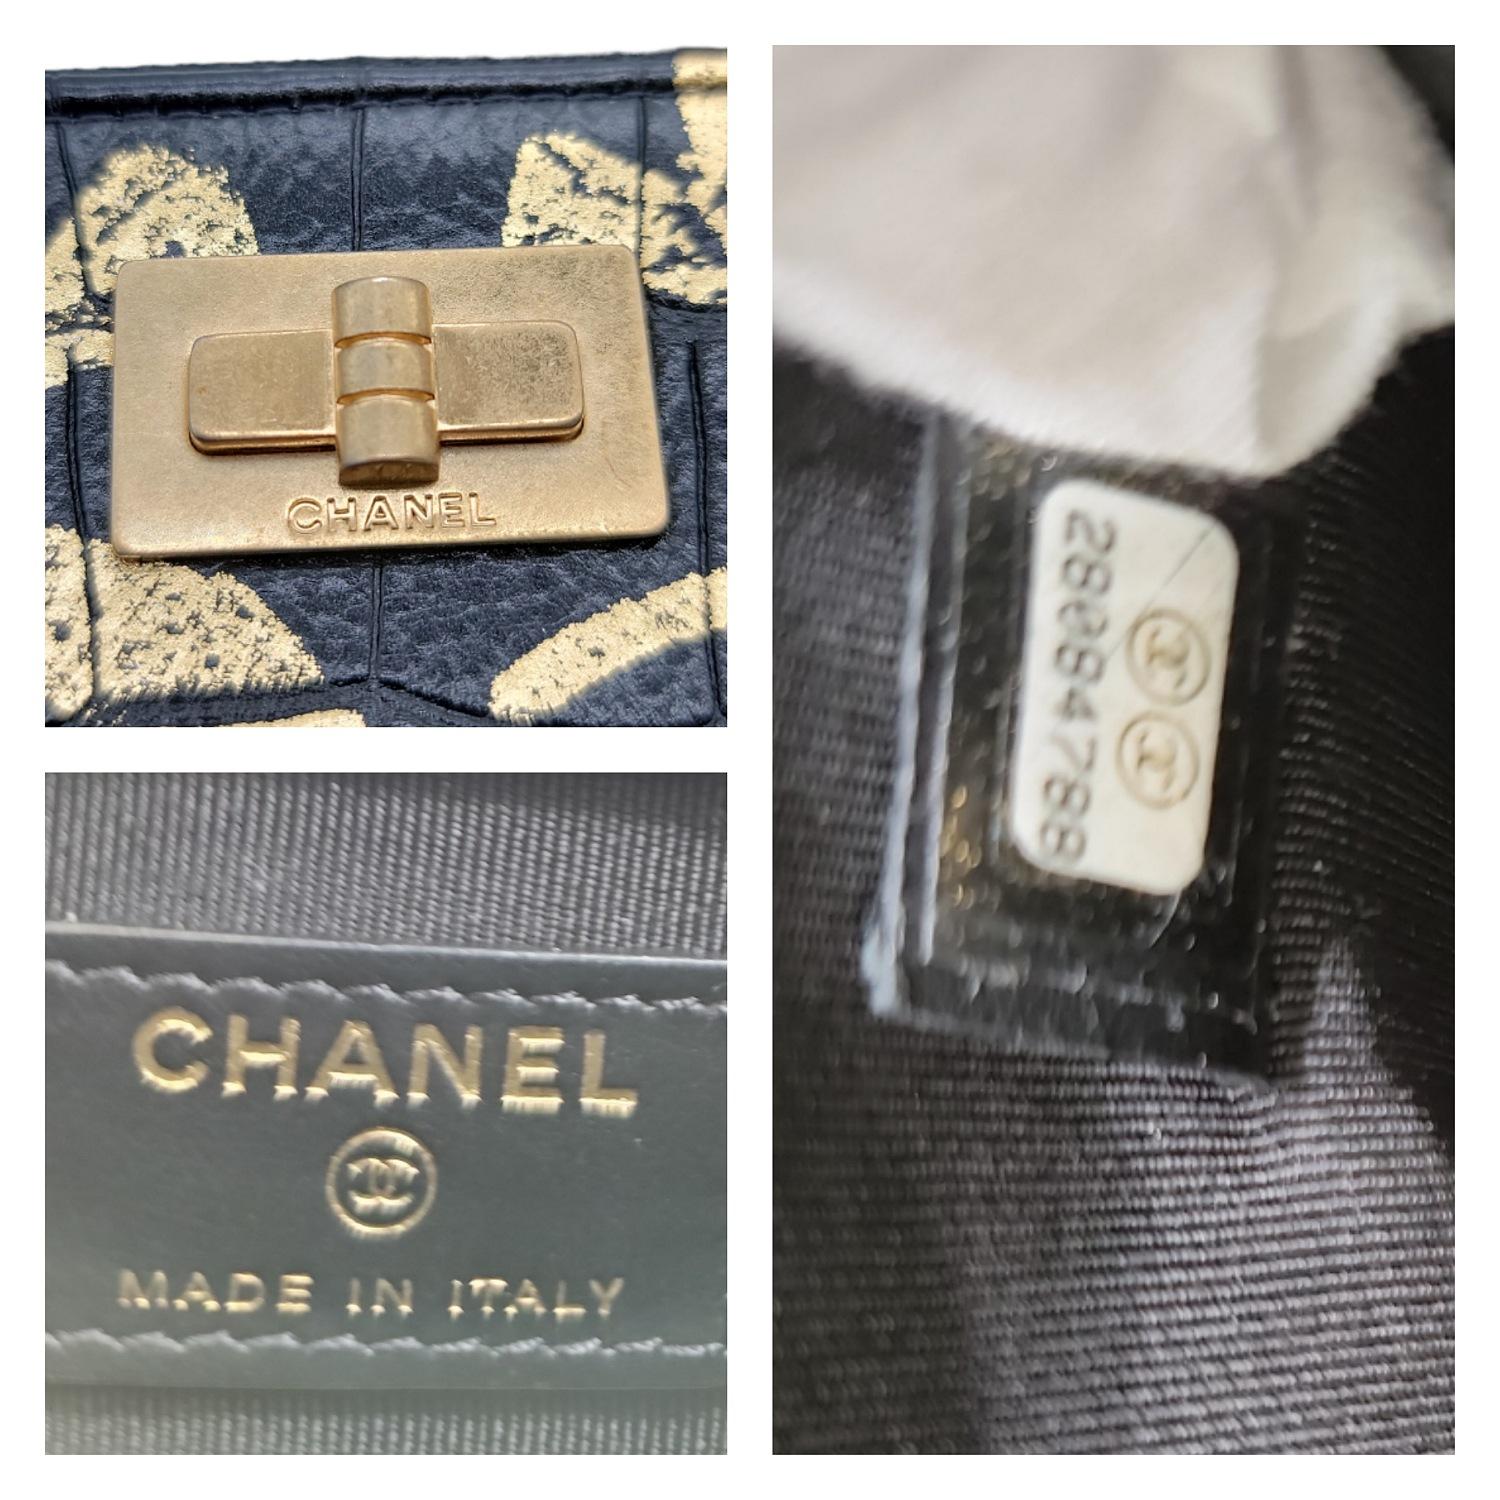 Chanel Black And Gold Croc-Embossed O-Case 2.55 Reissue For Sale 2